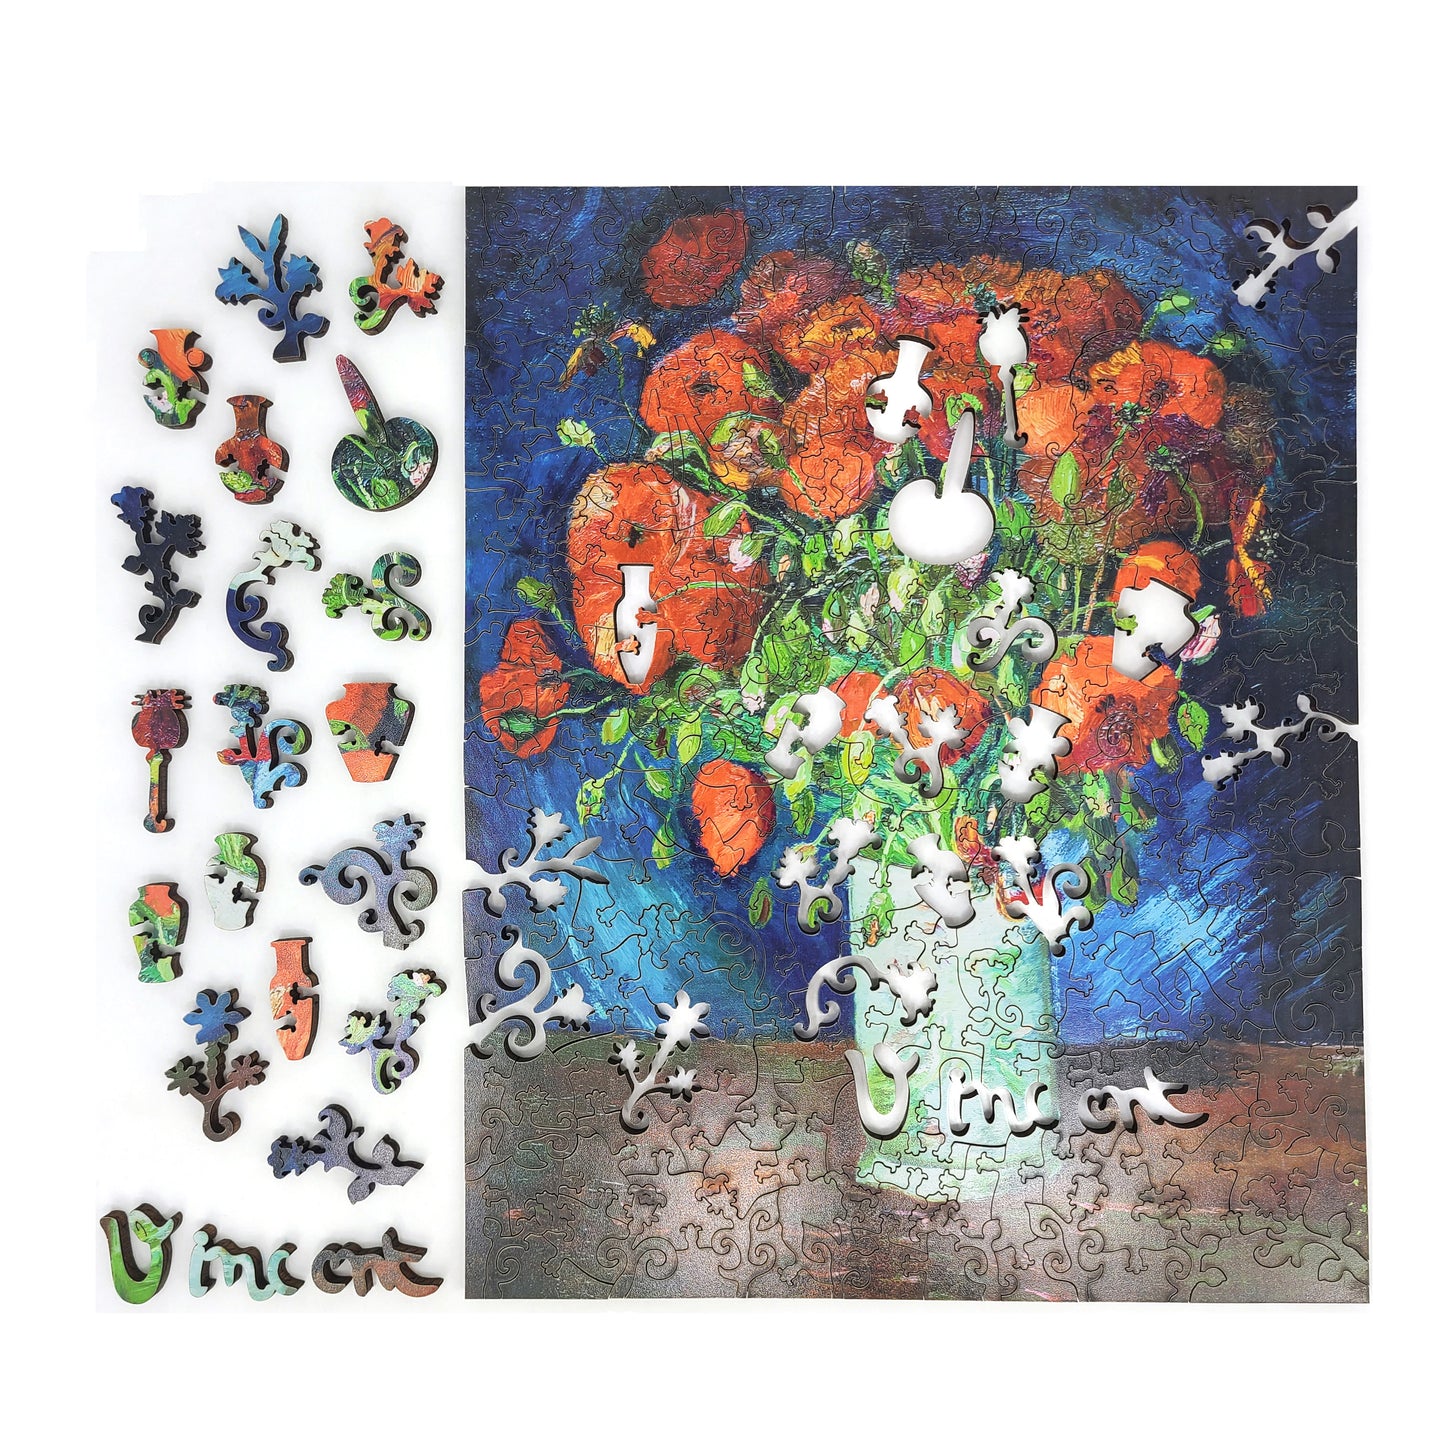 Wooden Jigsaw Puzzle with Uniquely Shaped Pieces for Adults - 235 Pieces - Vase with red poppies